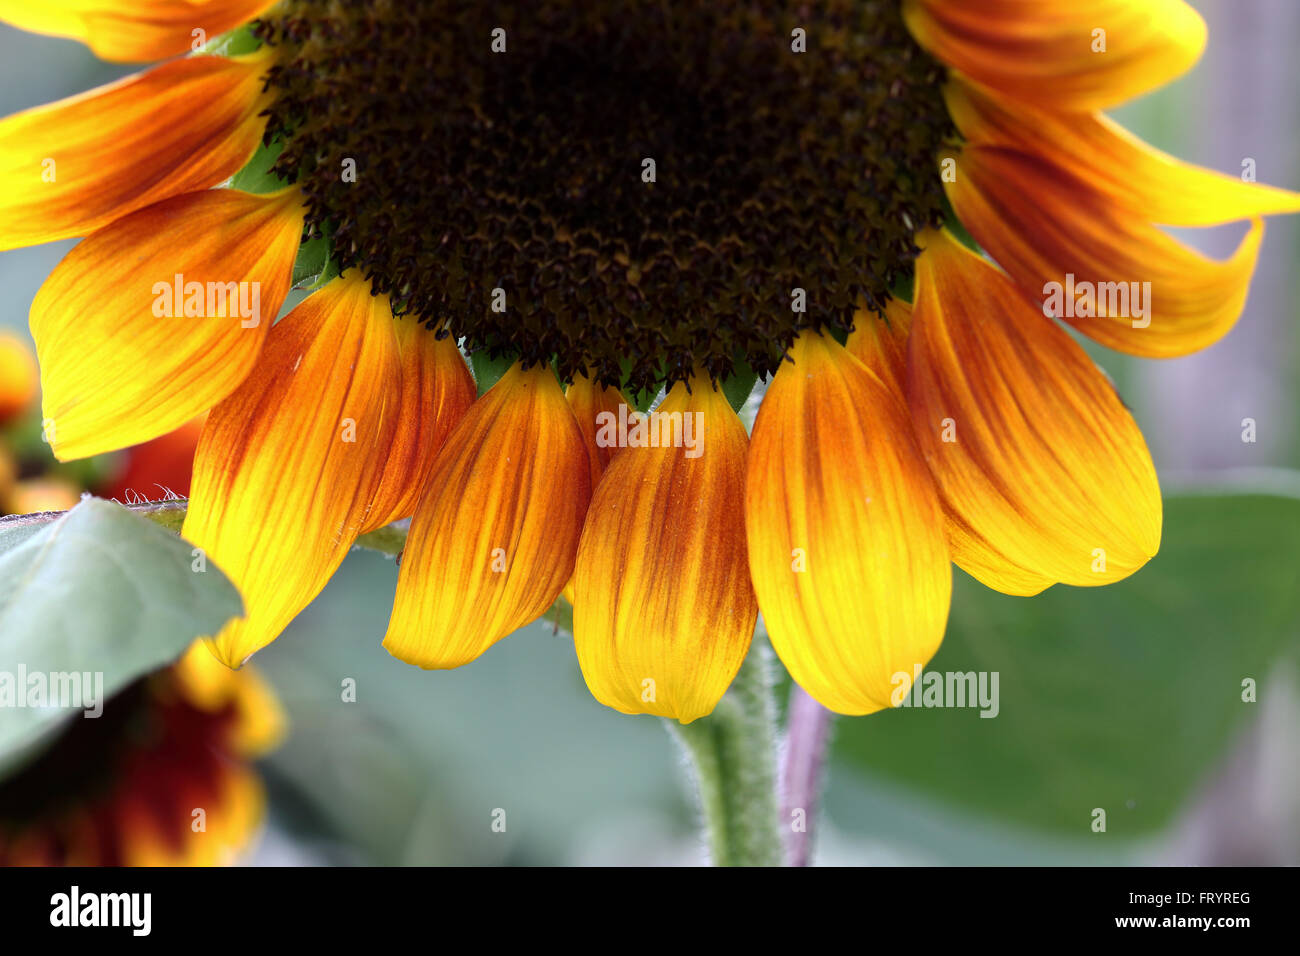 Helianthus annuus or known as Golden Prominence F1 sunflower Stock Photo